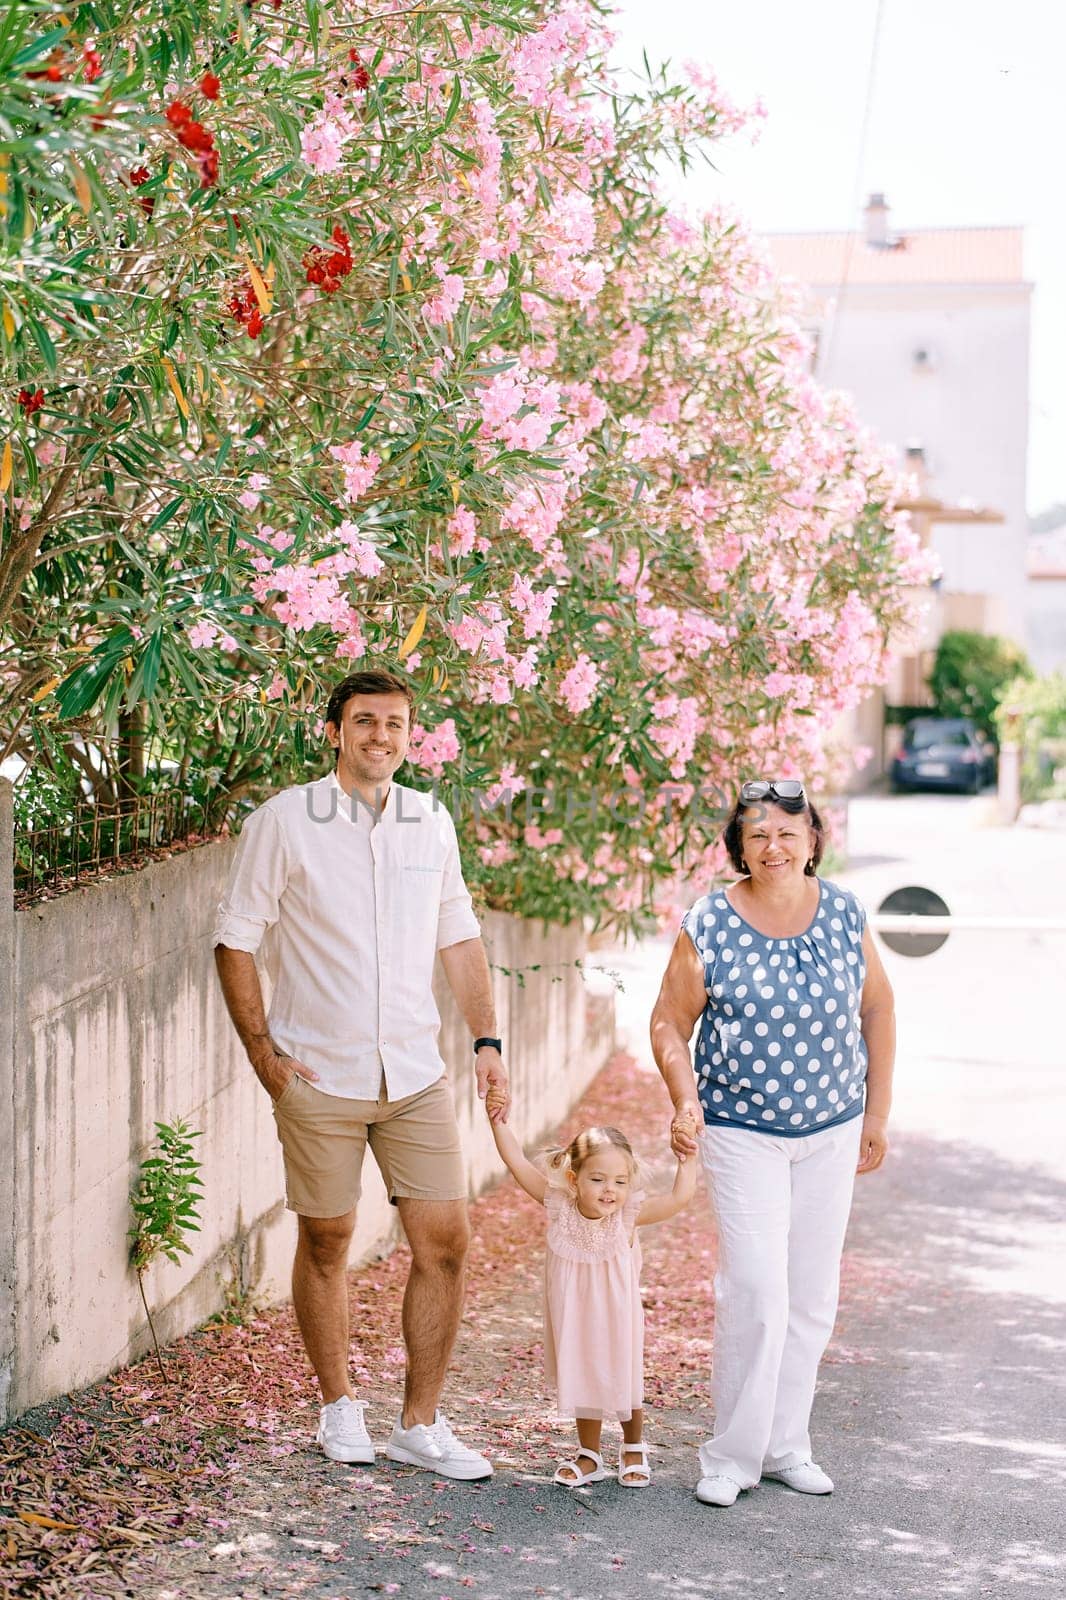 Smiling dad and grandma stand holding hands little girl near pink blooming oleander on the road by Nadtochiy